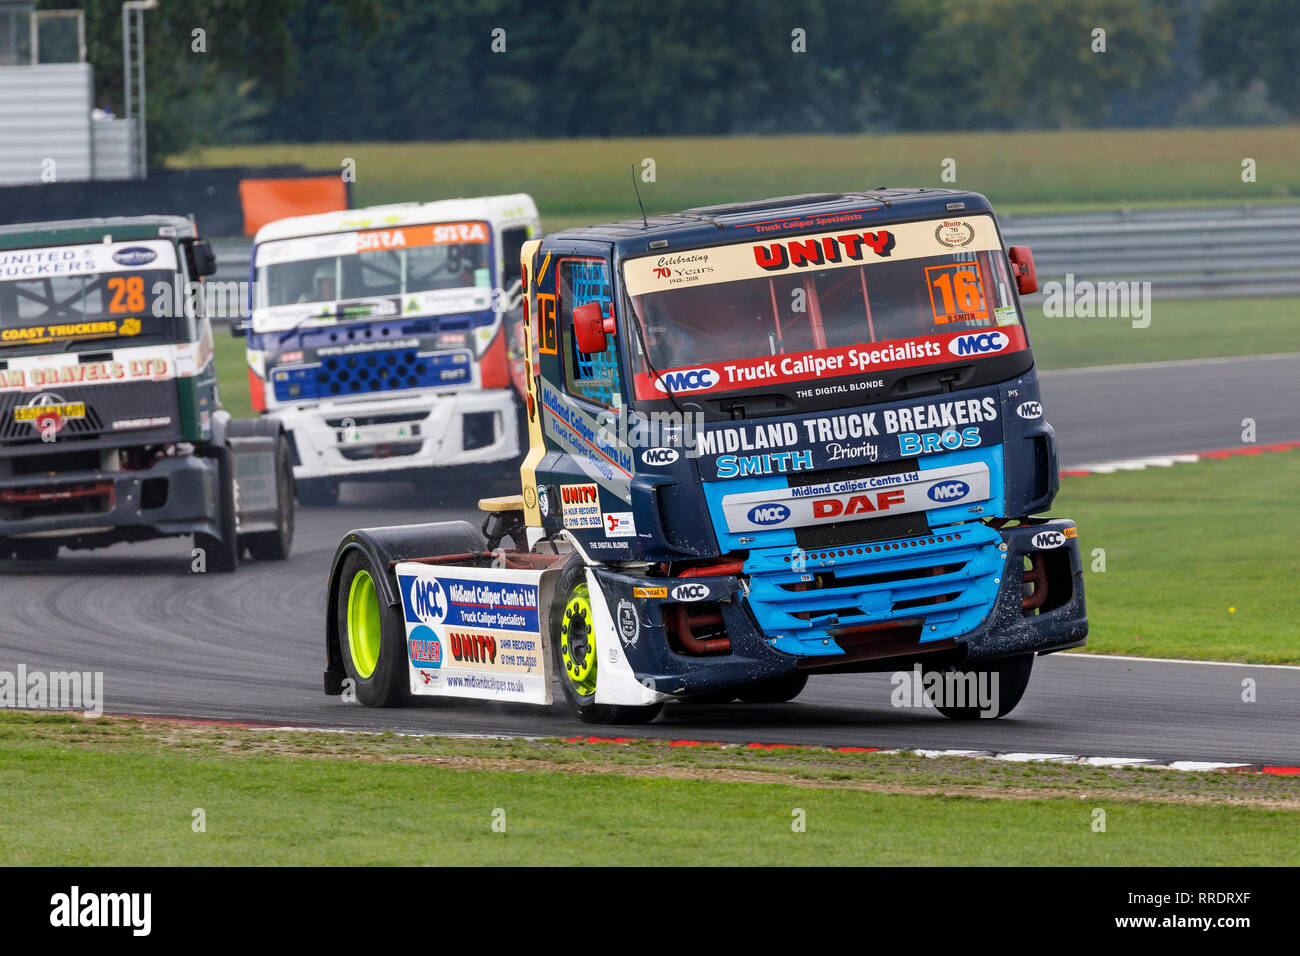 Brad Smith in the DAF CF, Division 2, Championship truck racing event at Snetterton 2018, Norfolk, UK. Stock Photo